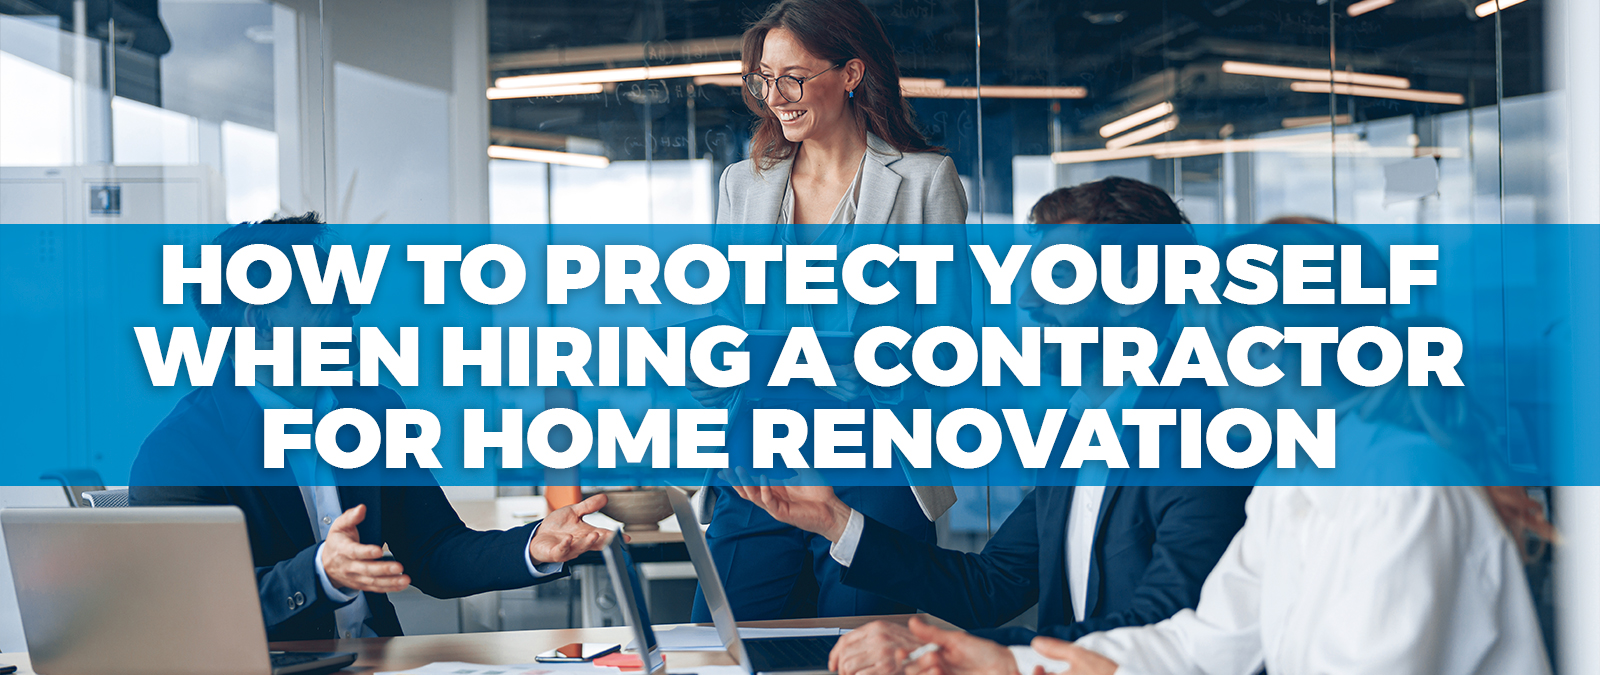 How to Protect Yourself When Hiring a Contractor for Home Renovation